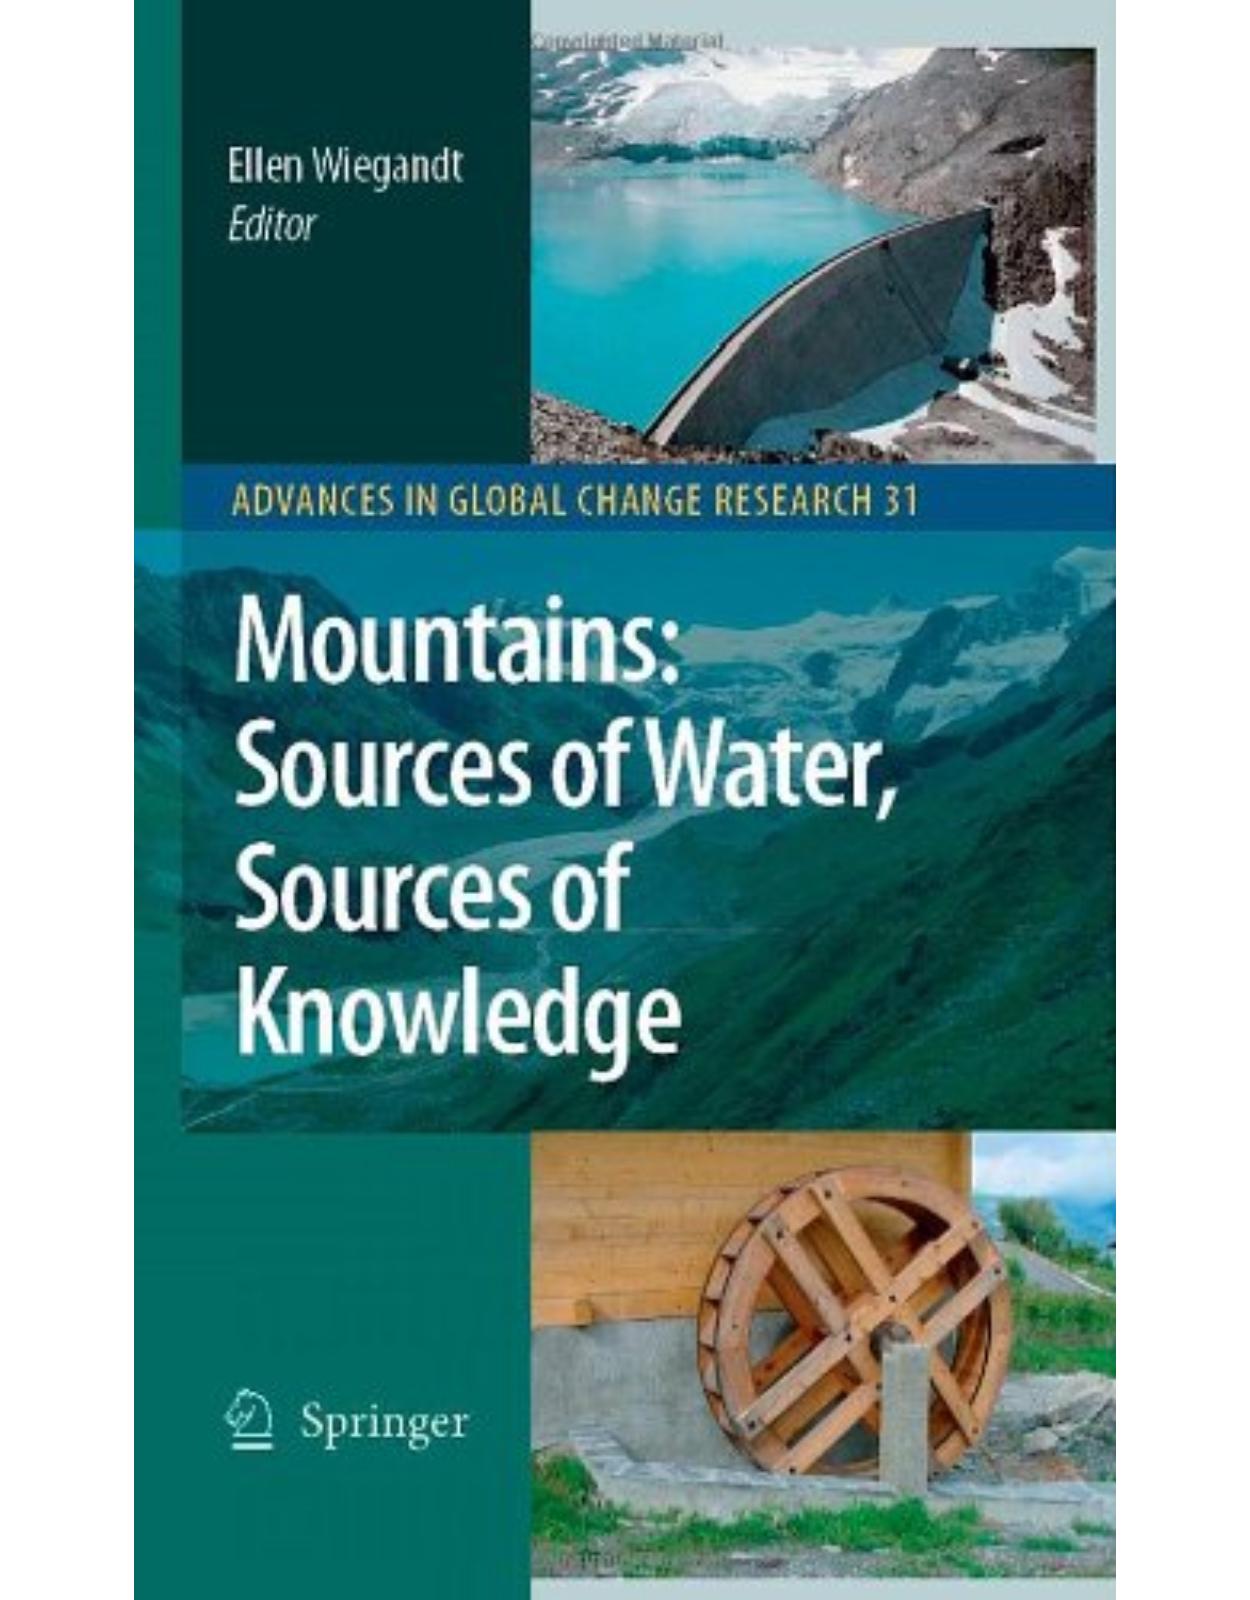 Mountains: Sources of Water, Sources of Knowledge (Advances in Global Change Research)